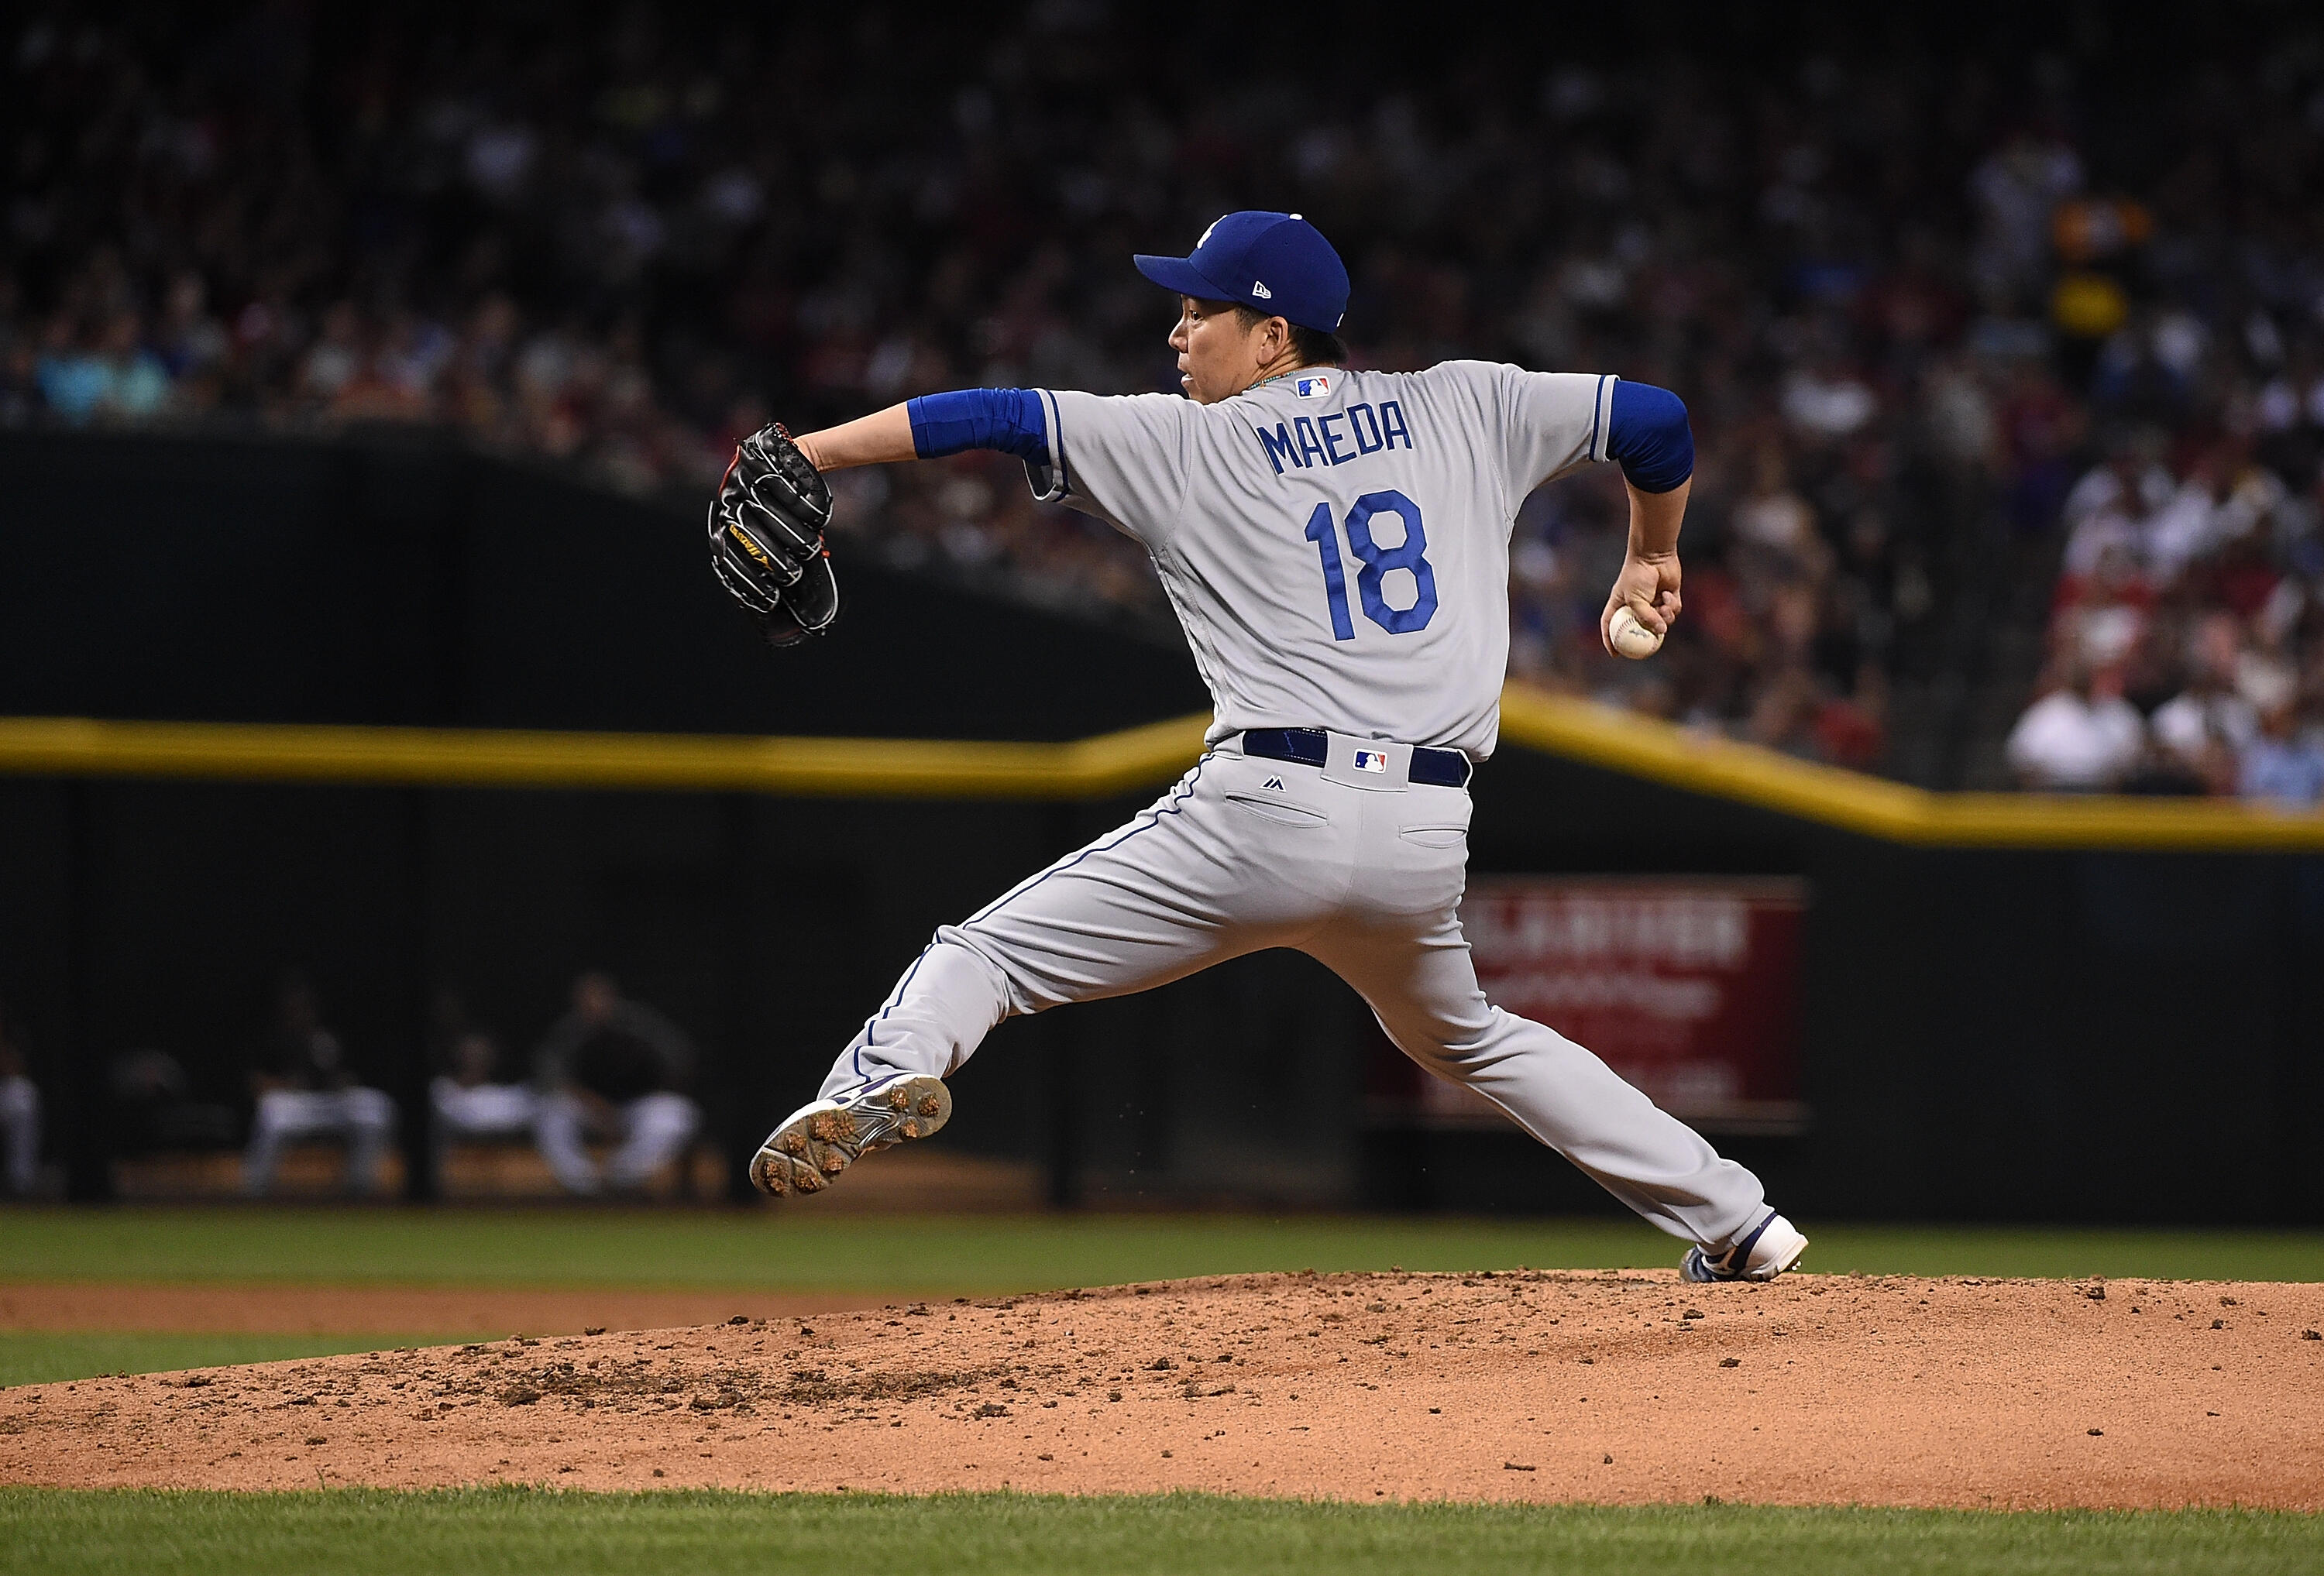 PHOENIX, AZ - APRIL 22:  Kenta Maeda #18 of the Los Angeles Dodgers delivers a second inning pitch against the Arizona Diamondbacks at Chase Field on April 22, 2017 in Phoenix, Arizona. Diamondbacks won 11-5.  (Photo by Norm Hall/Getty Images)